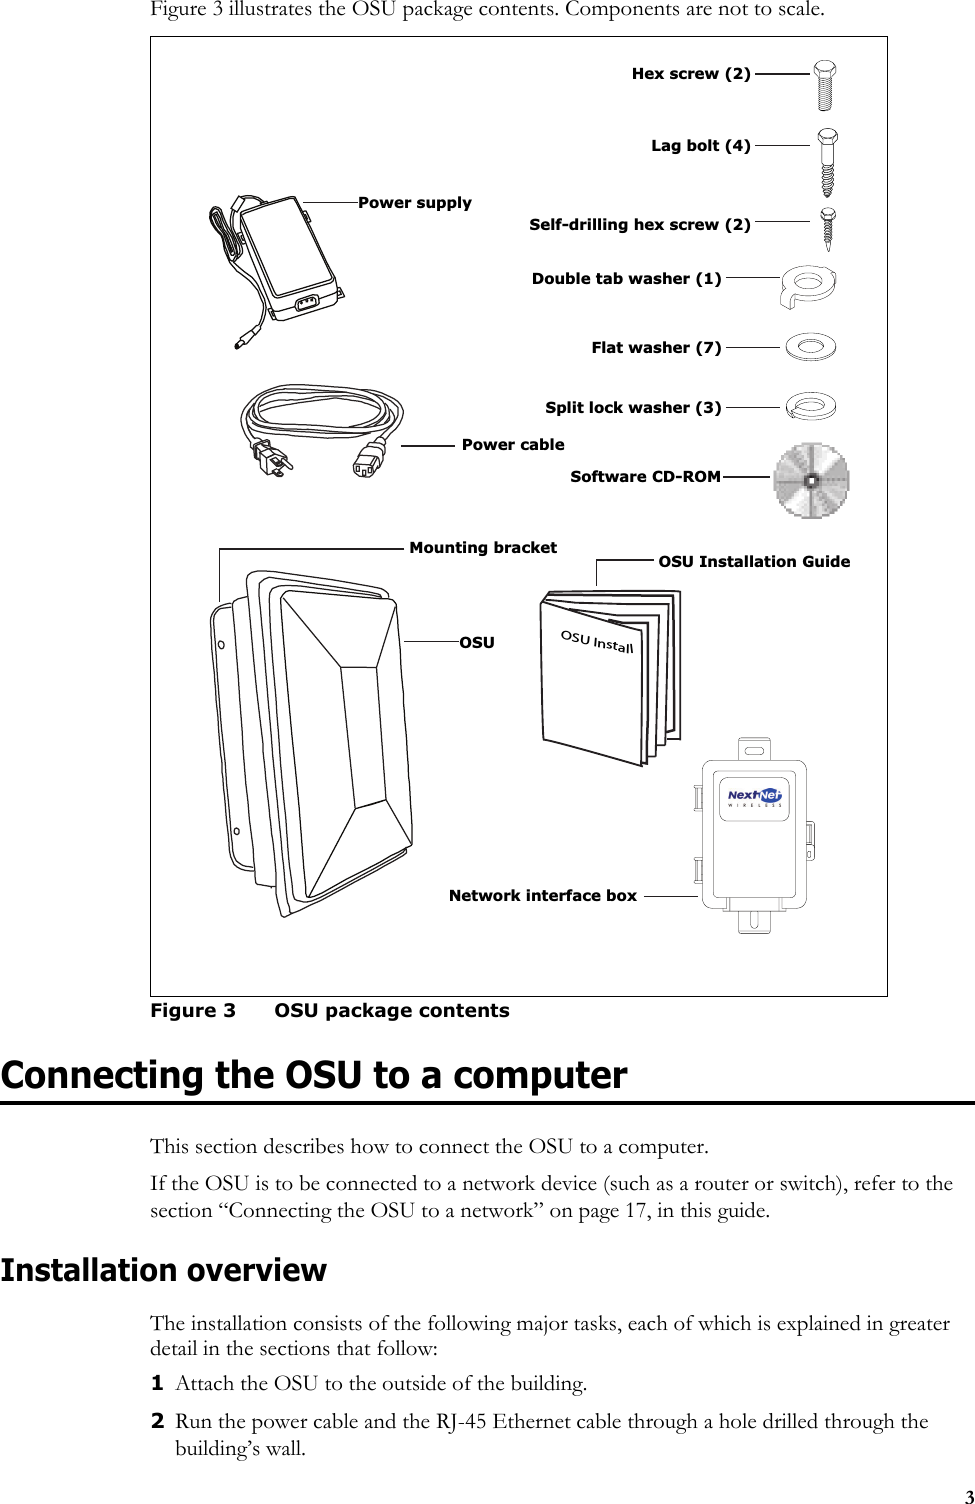 3Figure 3 illustrates the OSU package contents. Components are not to scale.Connecting the OSU to a computerThis section describes how to connect the OSU to a computer. If the OSU is to be connected to a network device (such as a router or switch), refer to the section “Connecting the OSU to a network” on page 17, in this guide. Installation overviewThe installation consists of the following major tasks, each of which is explained in greater detail in the sections that follow:1Attach the OSU to the outside of the building.2Run the power cable and the RJ-45 Ethernet cable through a hole drilled through the building’s wall.Figure 3 OSU package contentsNetwork interface boxSoftware CD-ROMPower supplyOSUInstallOSU Installation GuideOSUMounting bracketDouble tab washer (1)Flat washer (7)Split lock washer (3)Power cableLag bolt (4)Hex screw (2)Self-drilling hex screw (2)